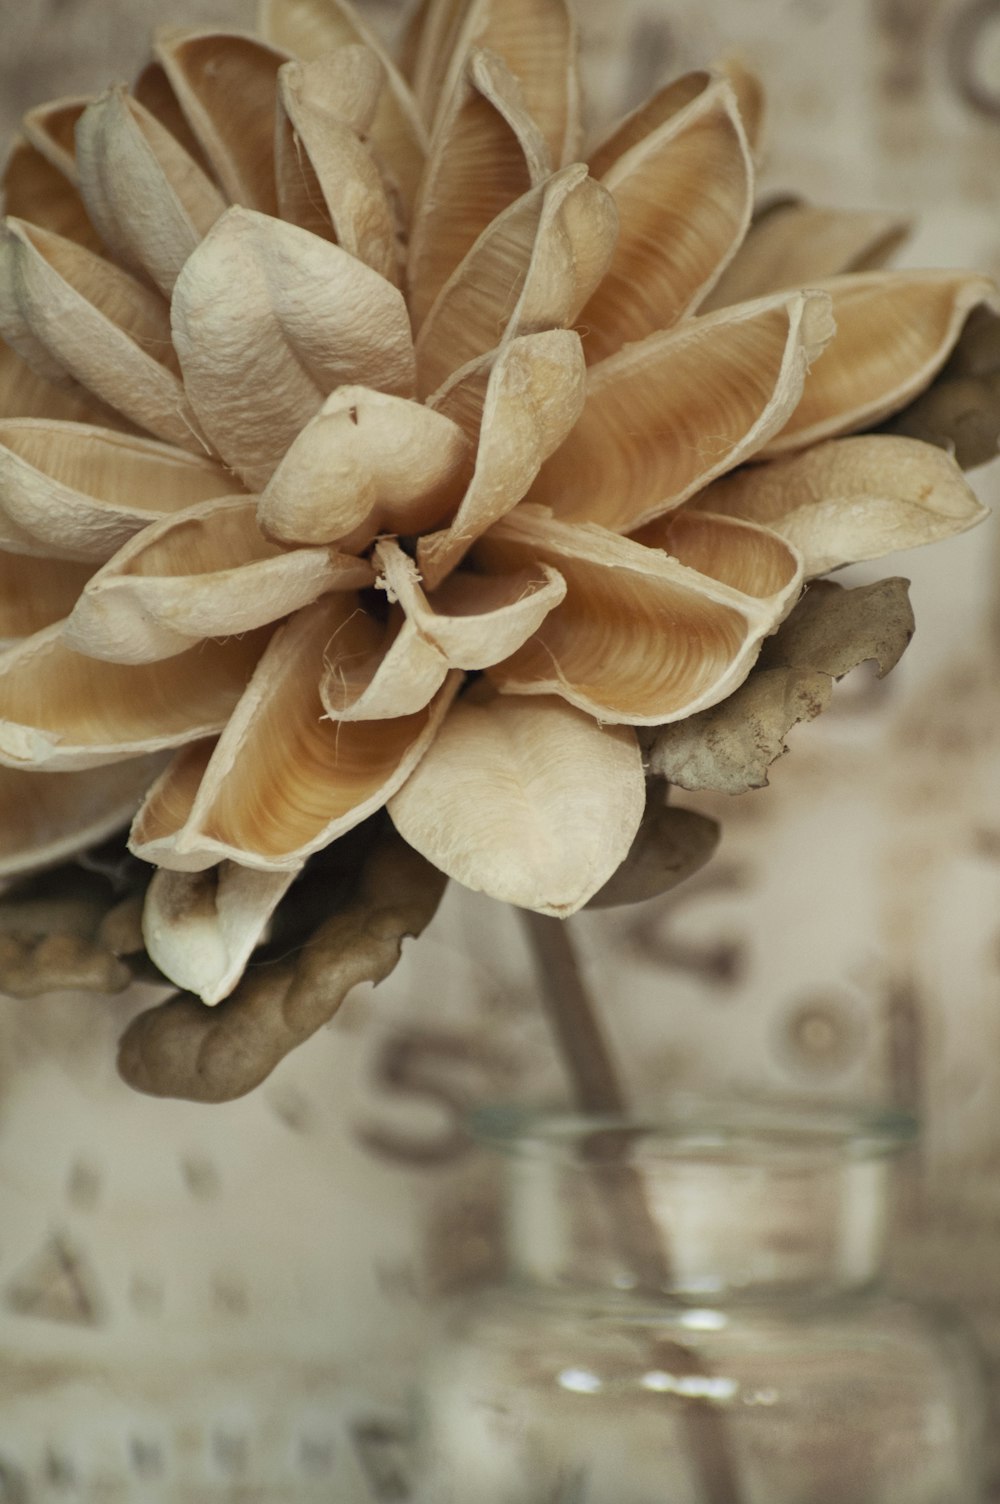 brown and white petaled flower close-up photography